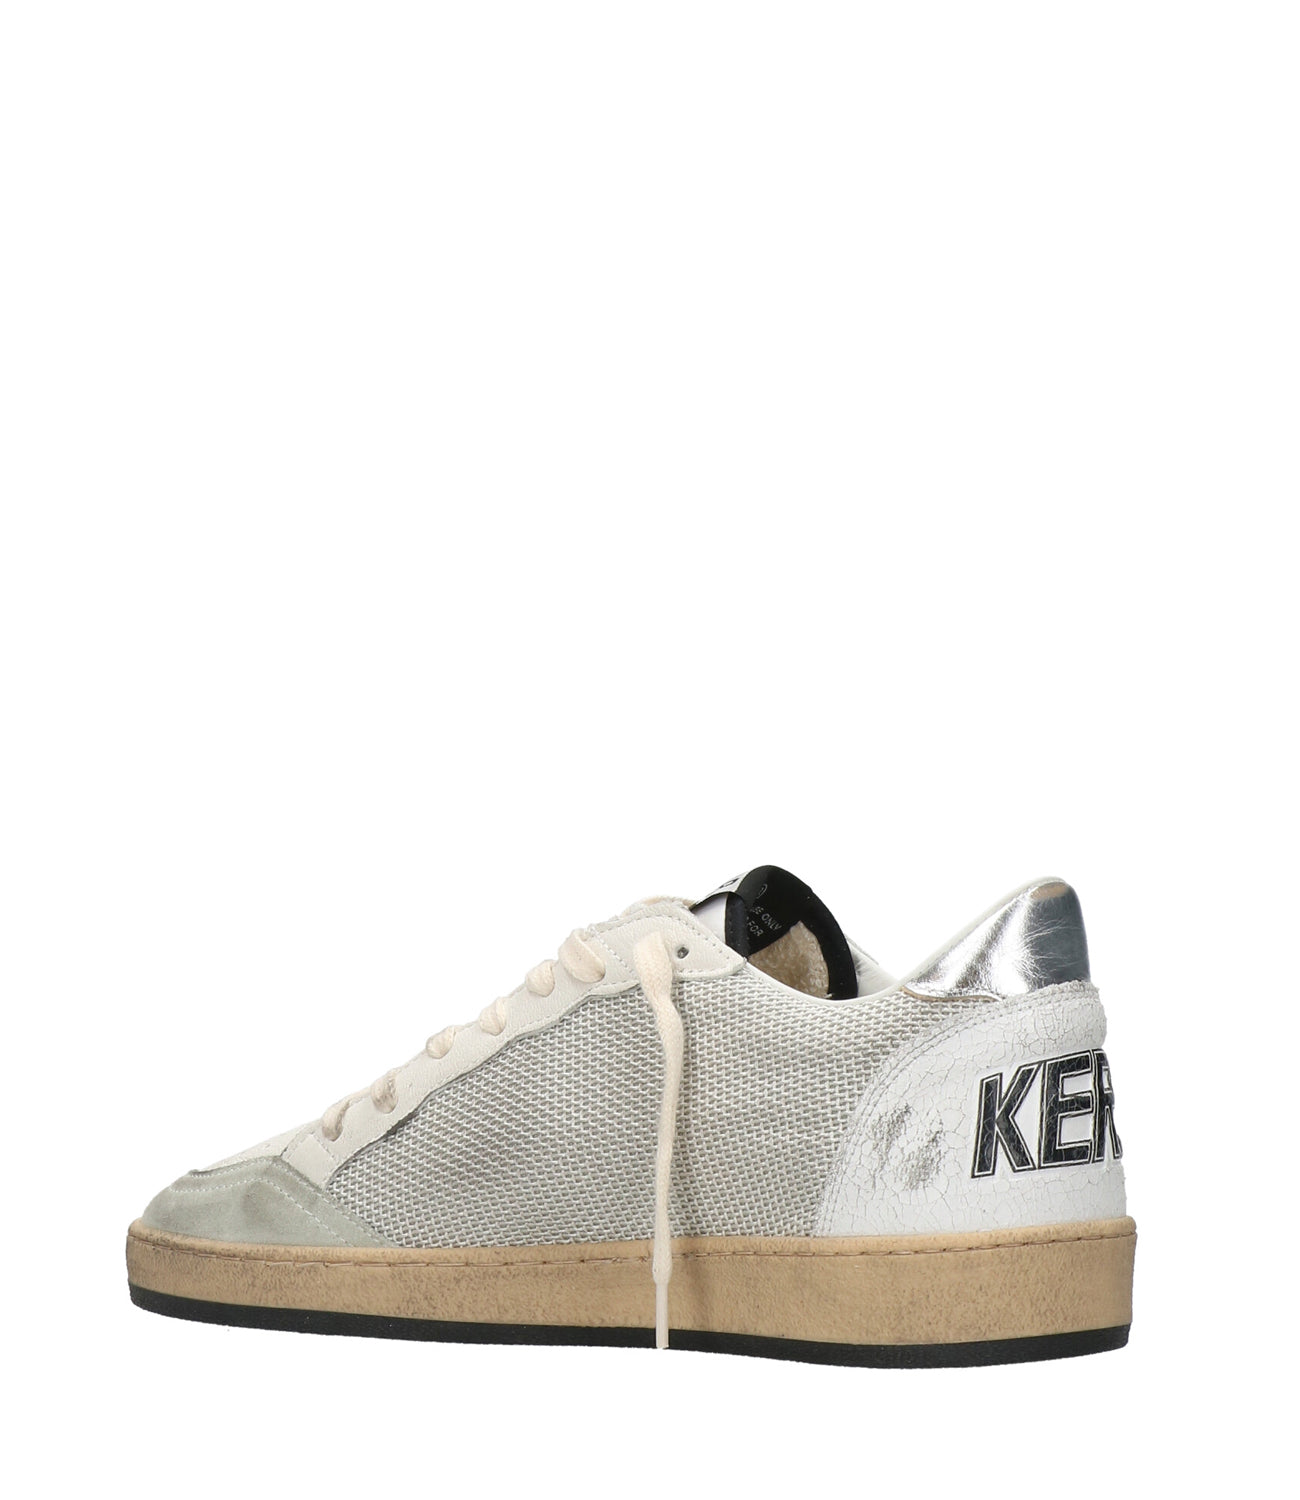 Golden Goose | Ball Star Sneakers Silver Black and White